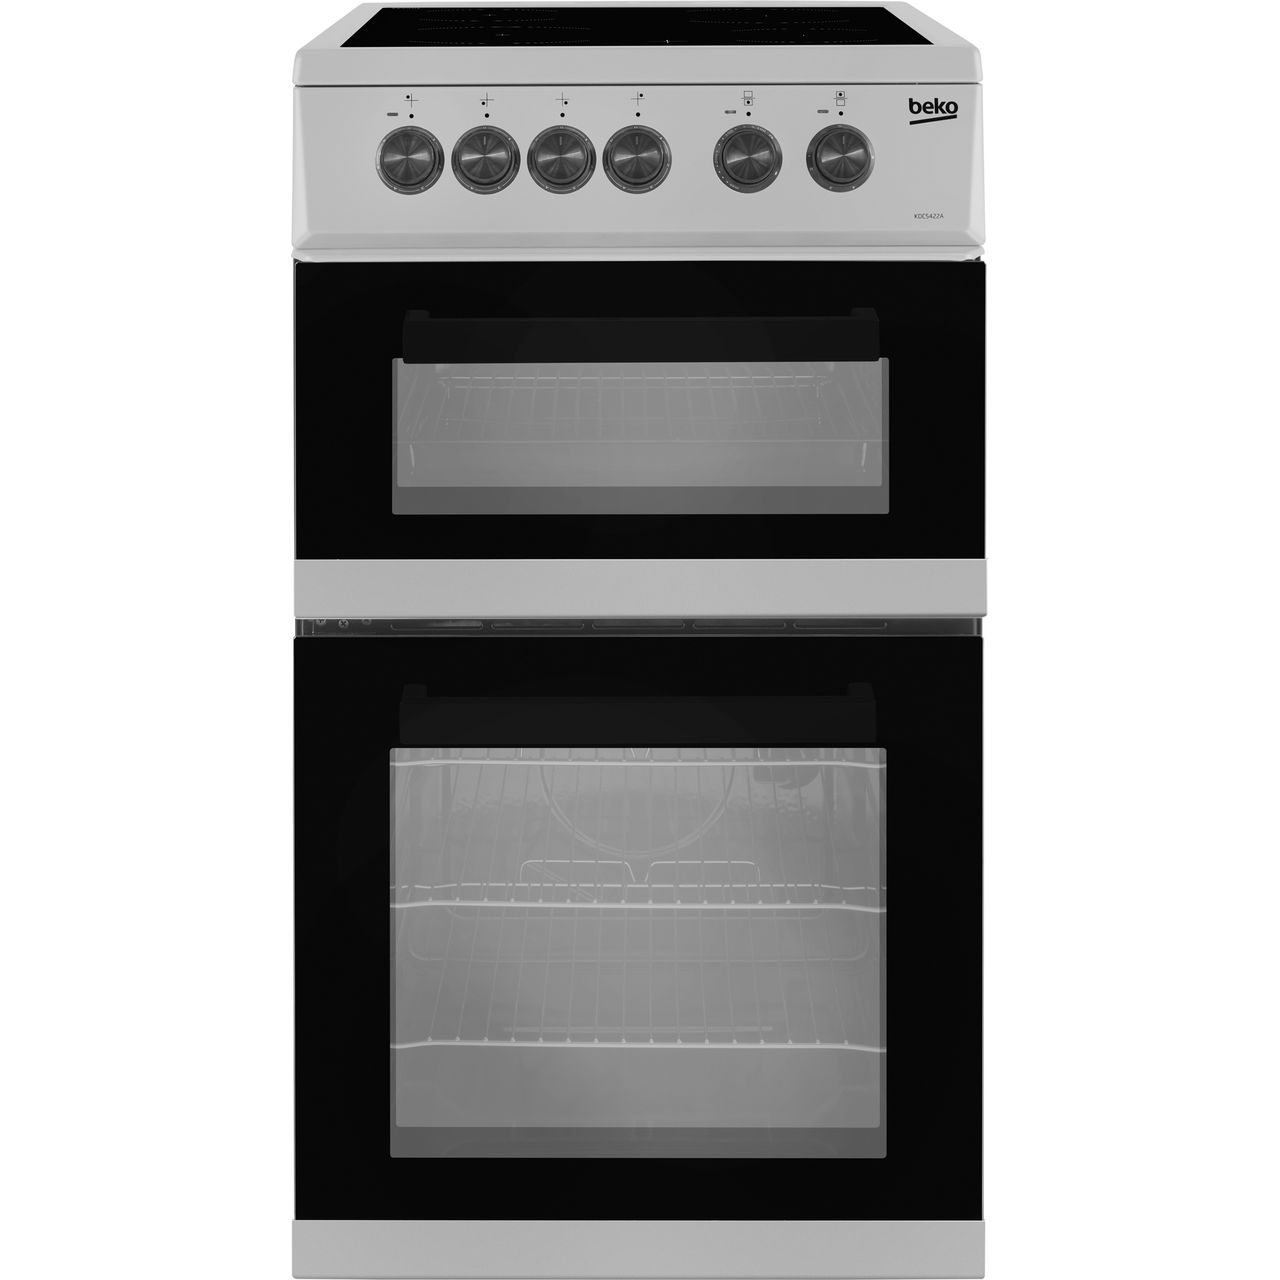 Beko KDC5422AS 50cm Electric Cooker with Ceramic Hob Review